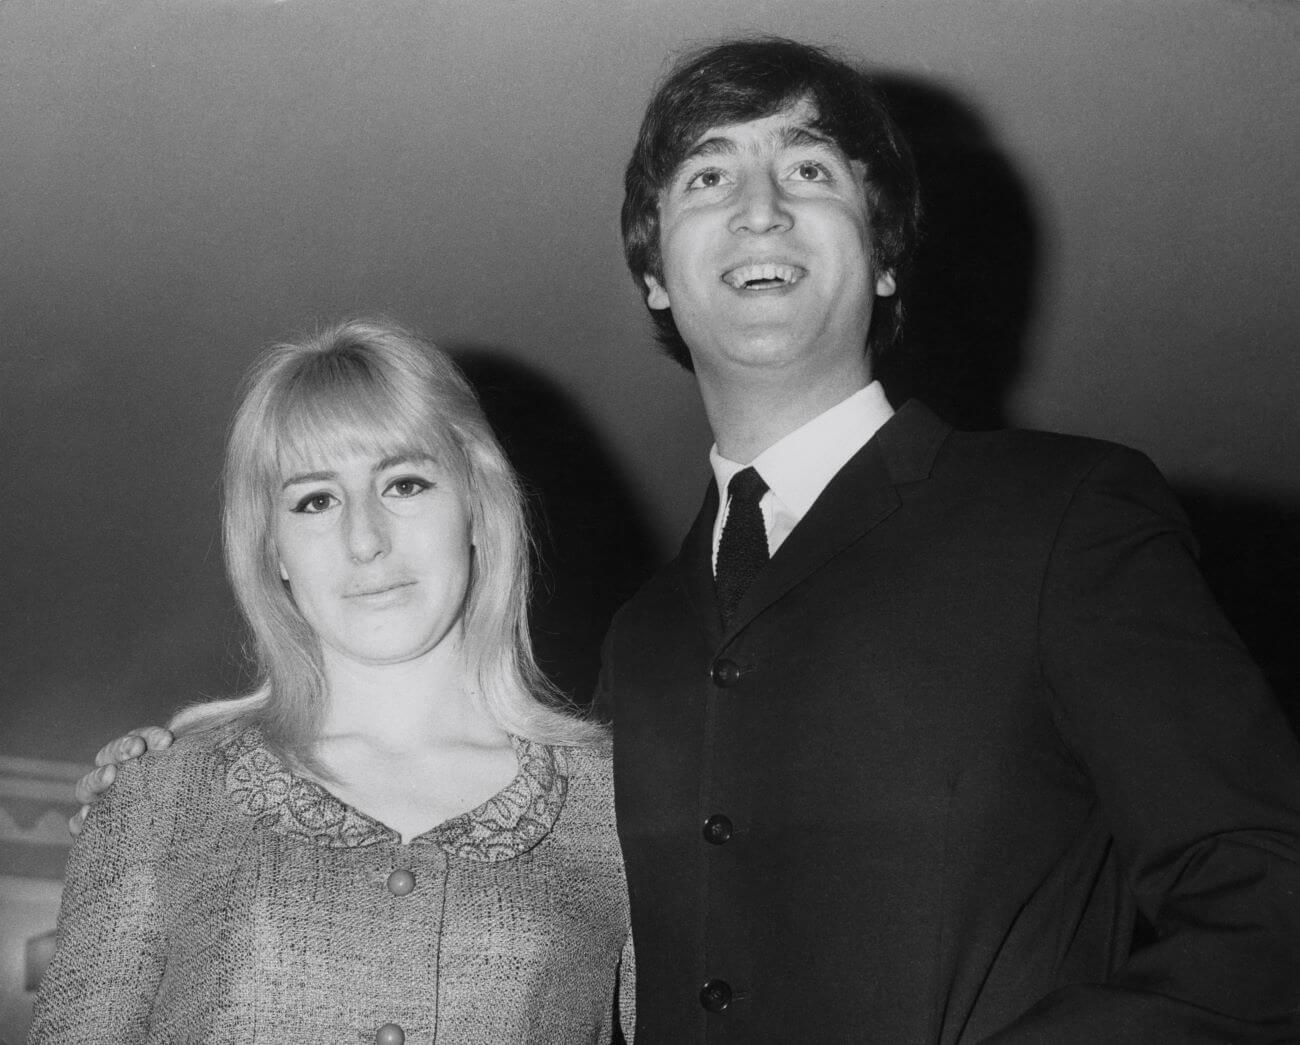 A black and white picture of John Lennon standing with his arm around his wife Cynthia's shoulders.